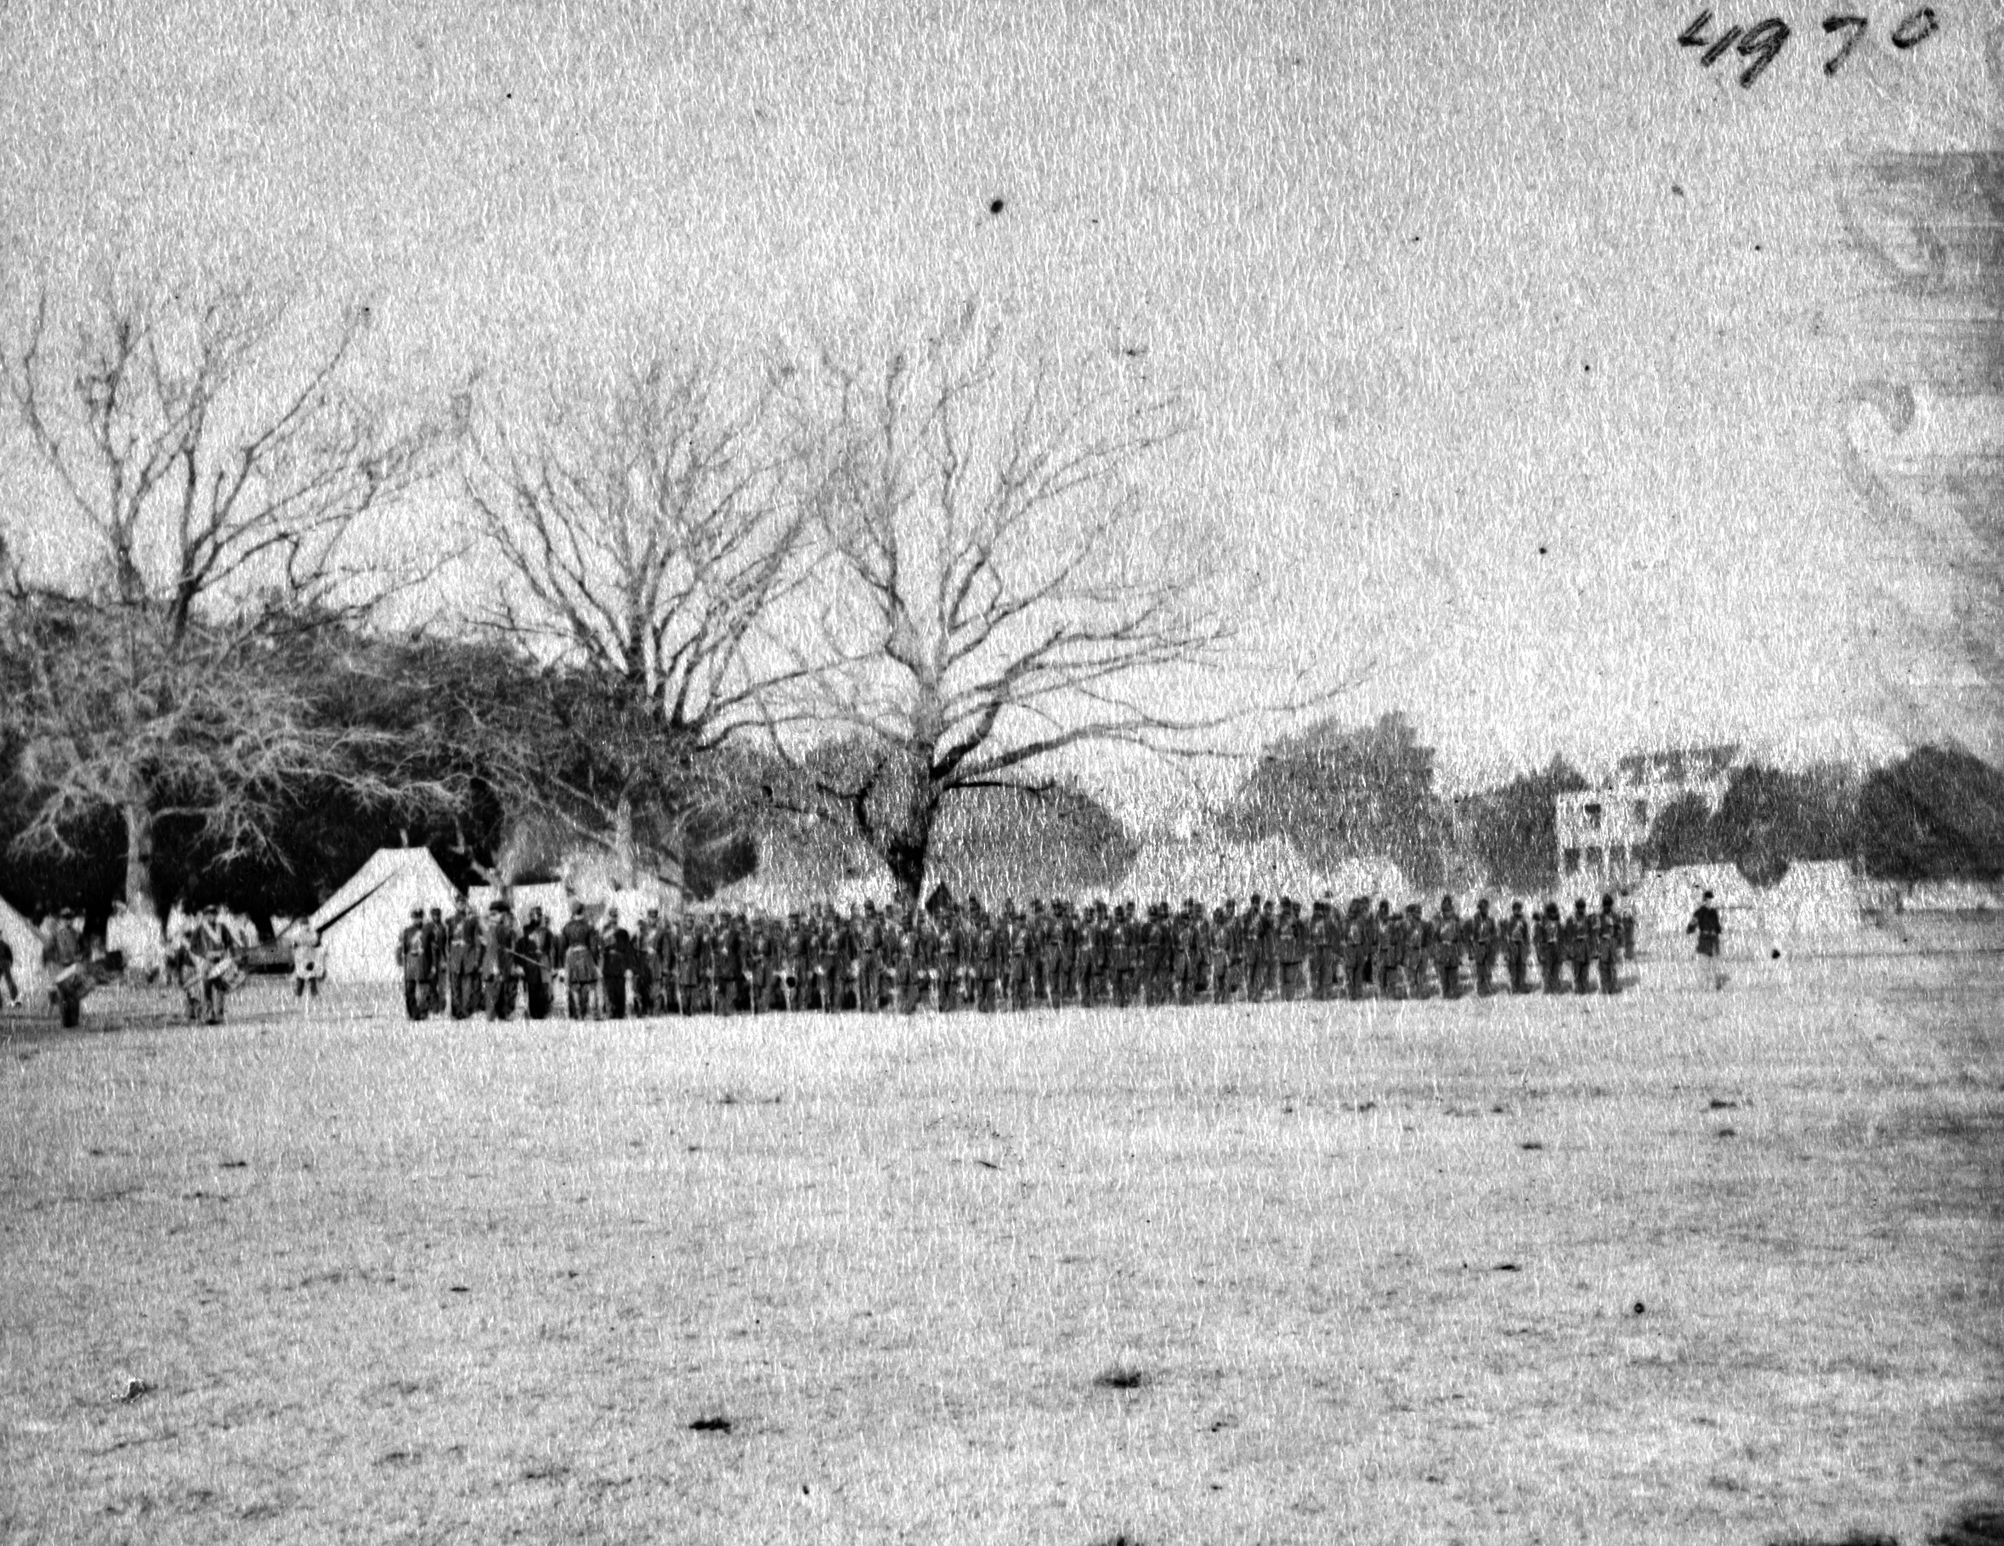 The 1st South Carolina Regiment of U.S. Colored Troops is shown on parade in Beaufort, South Carolina, in a period photograph. 